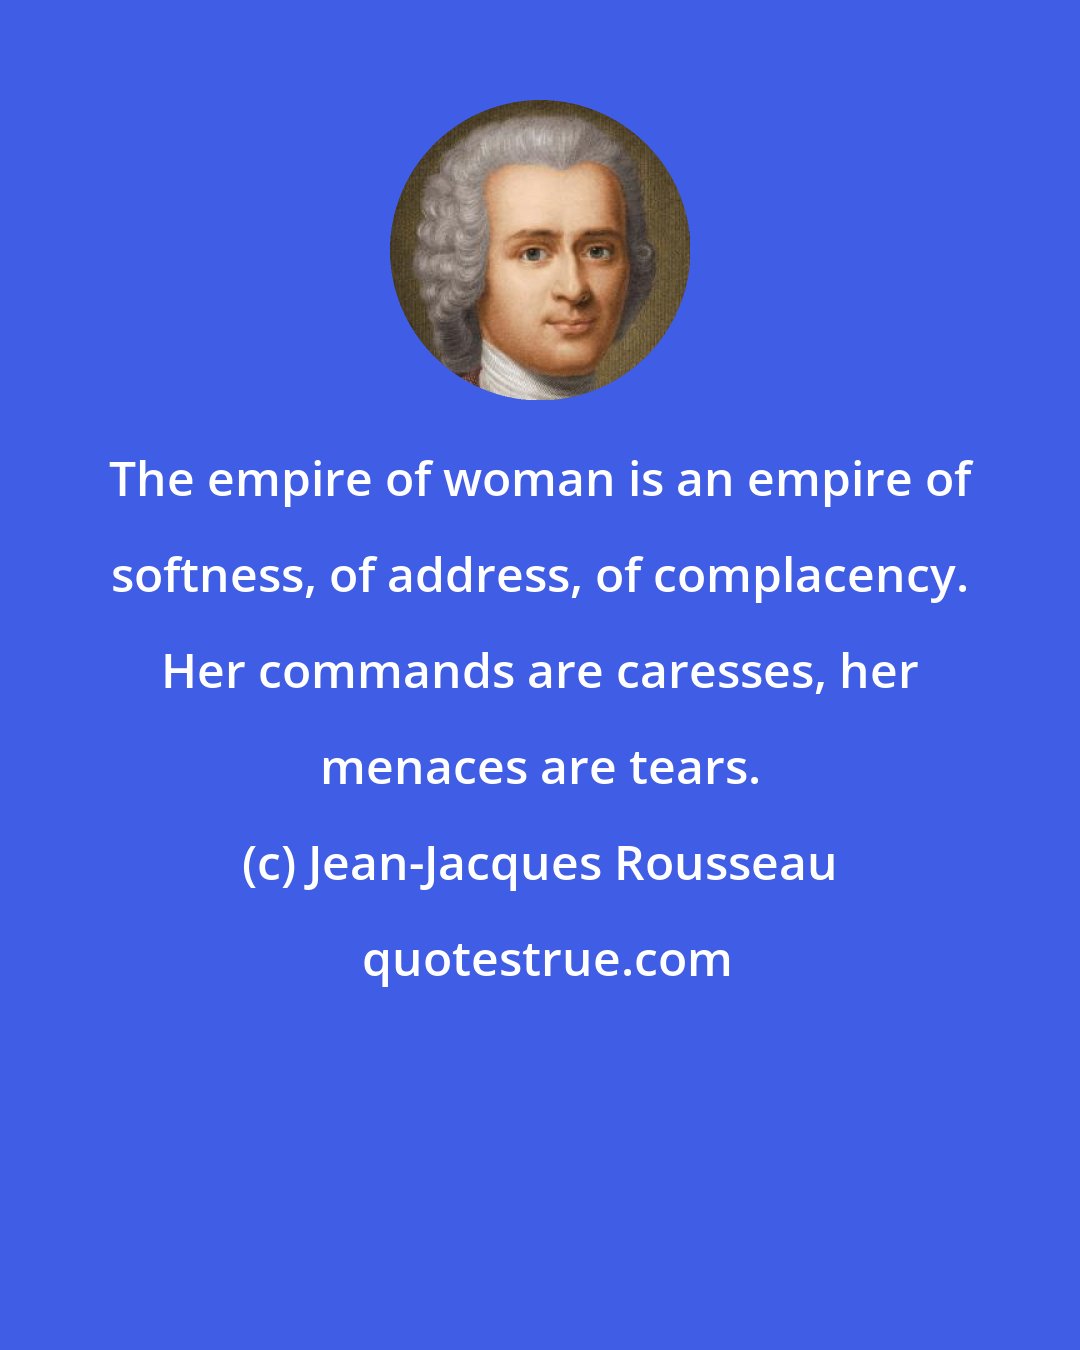 Jean-Jacques Rousseau: The empire of woman is an empire of softness, of address, of complacency. Her commands are caresses, her menaces are tears.